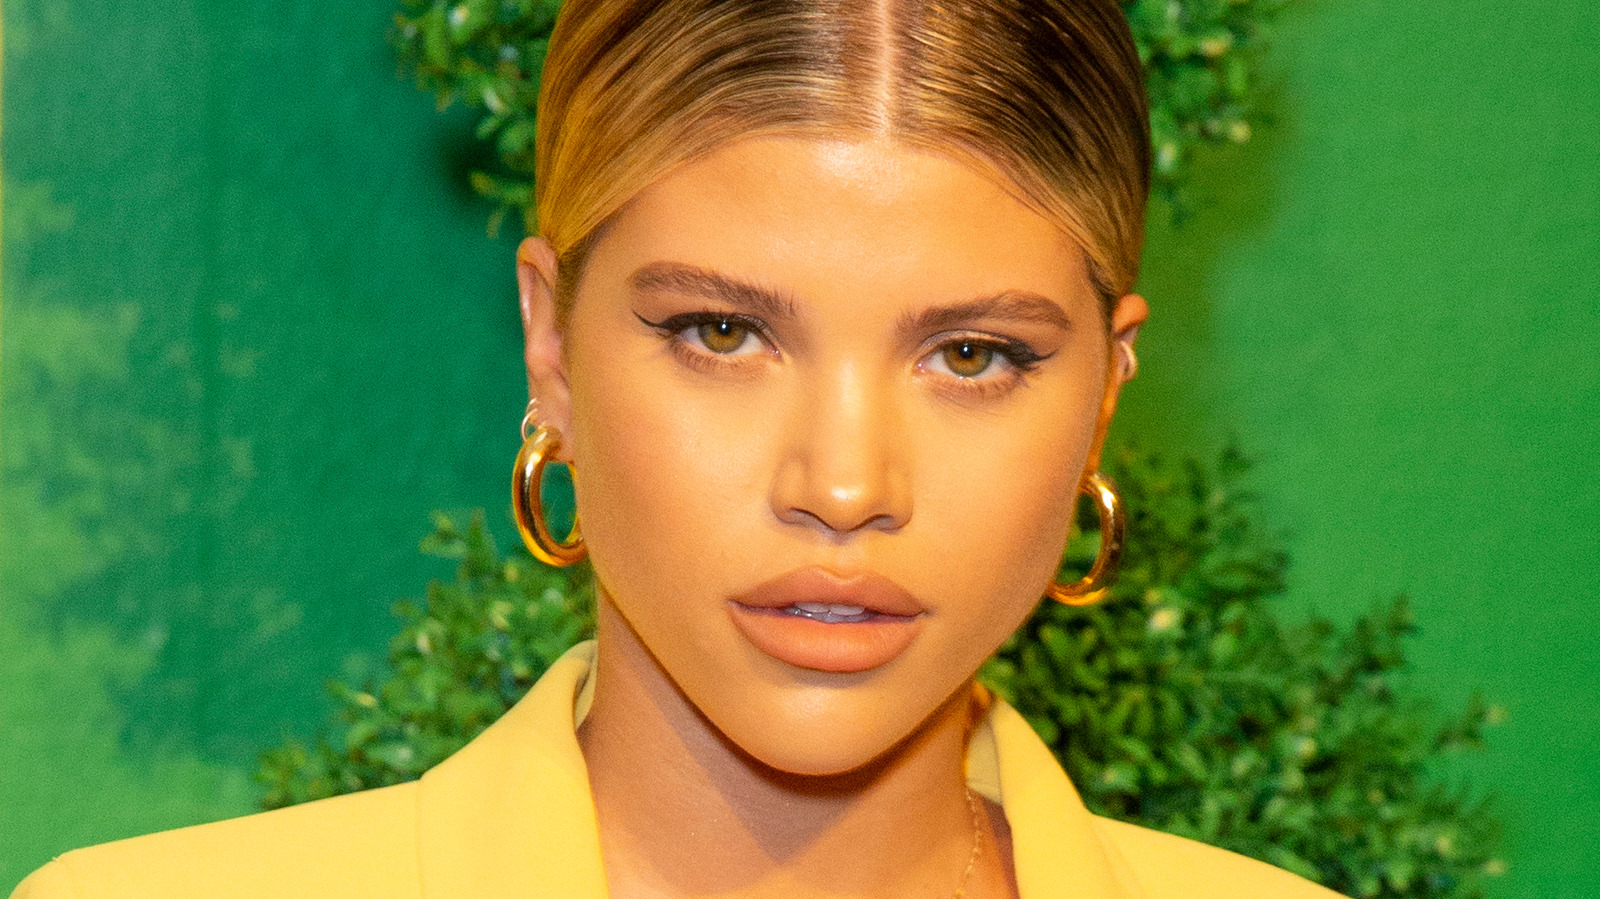 Sofia Richie IG Famous Flower iPhone Case DIY — Topknots and Pearls